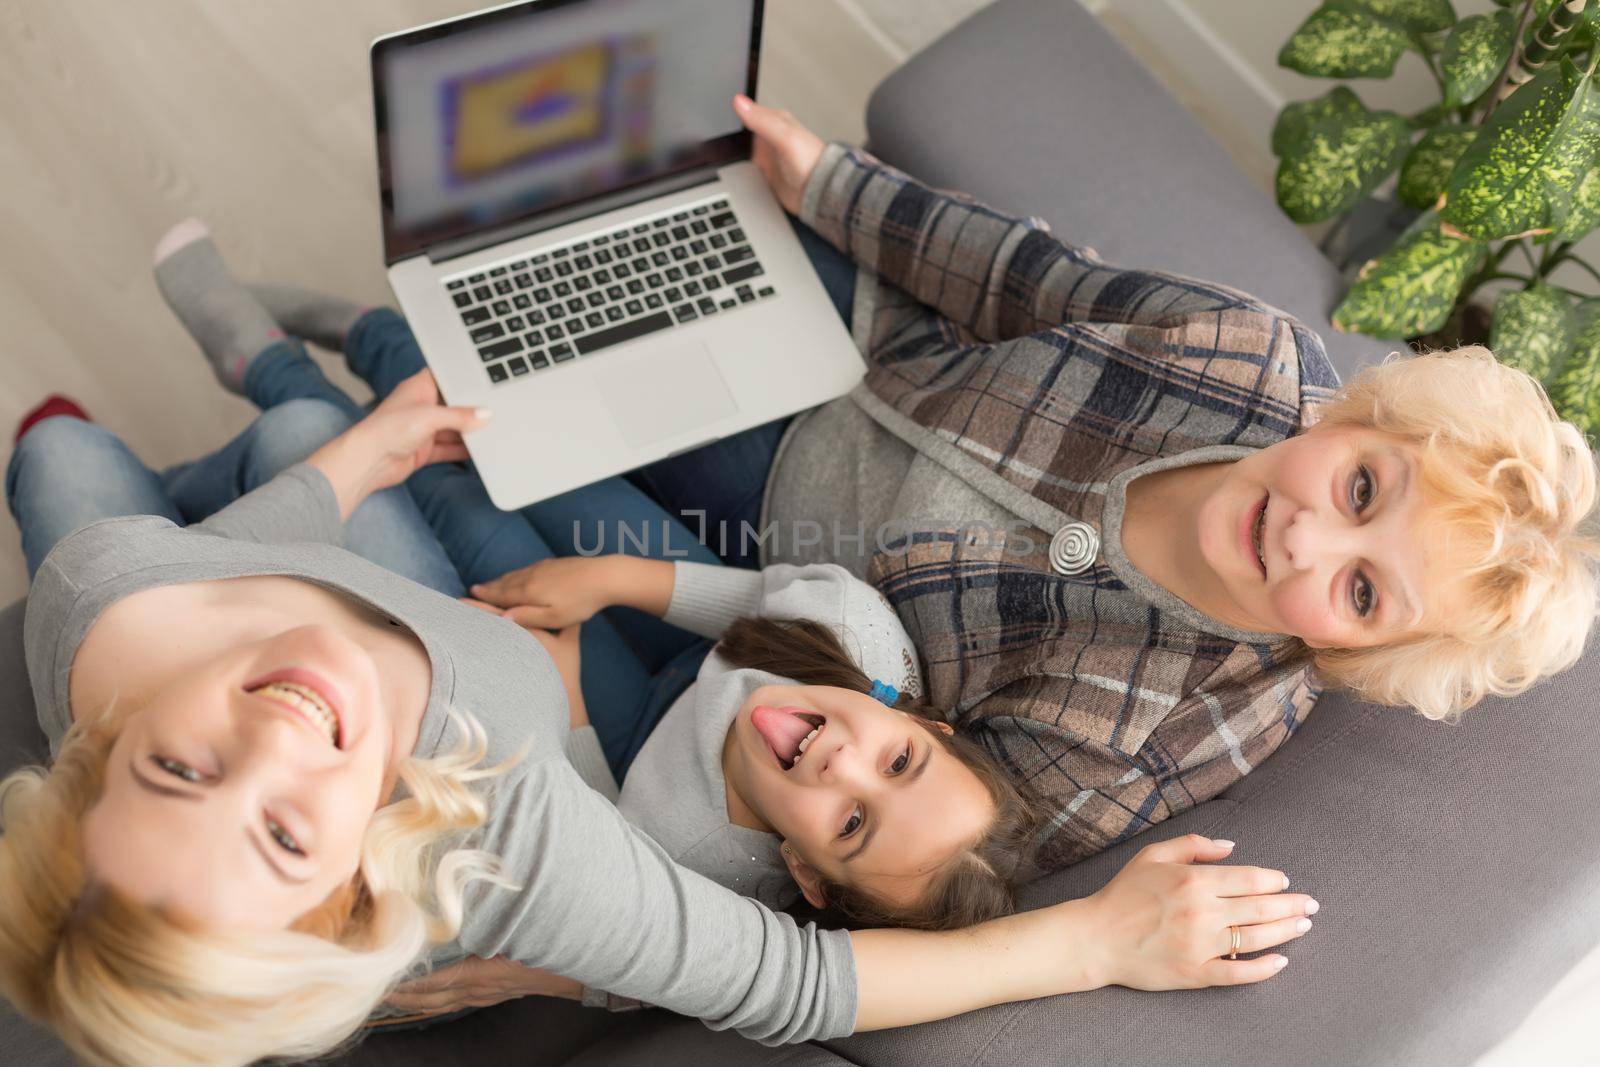 Happy three generations of women sit relax on couch laugh watching funny video on laptop, smiling positive females grandmother, mother and daughter have fun rest on sofa enjoy movie on computer